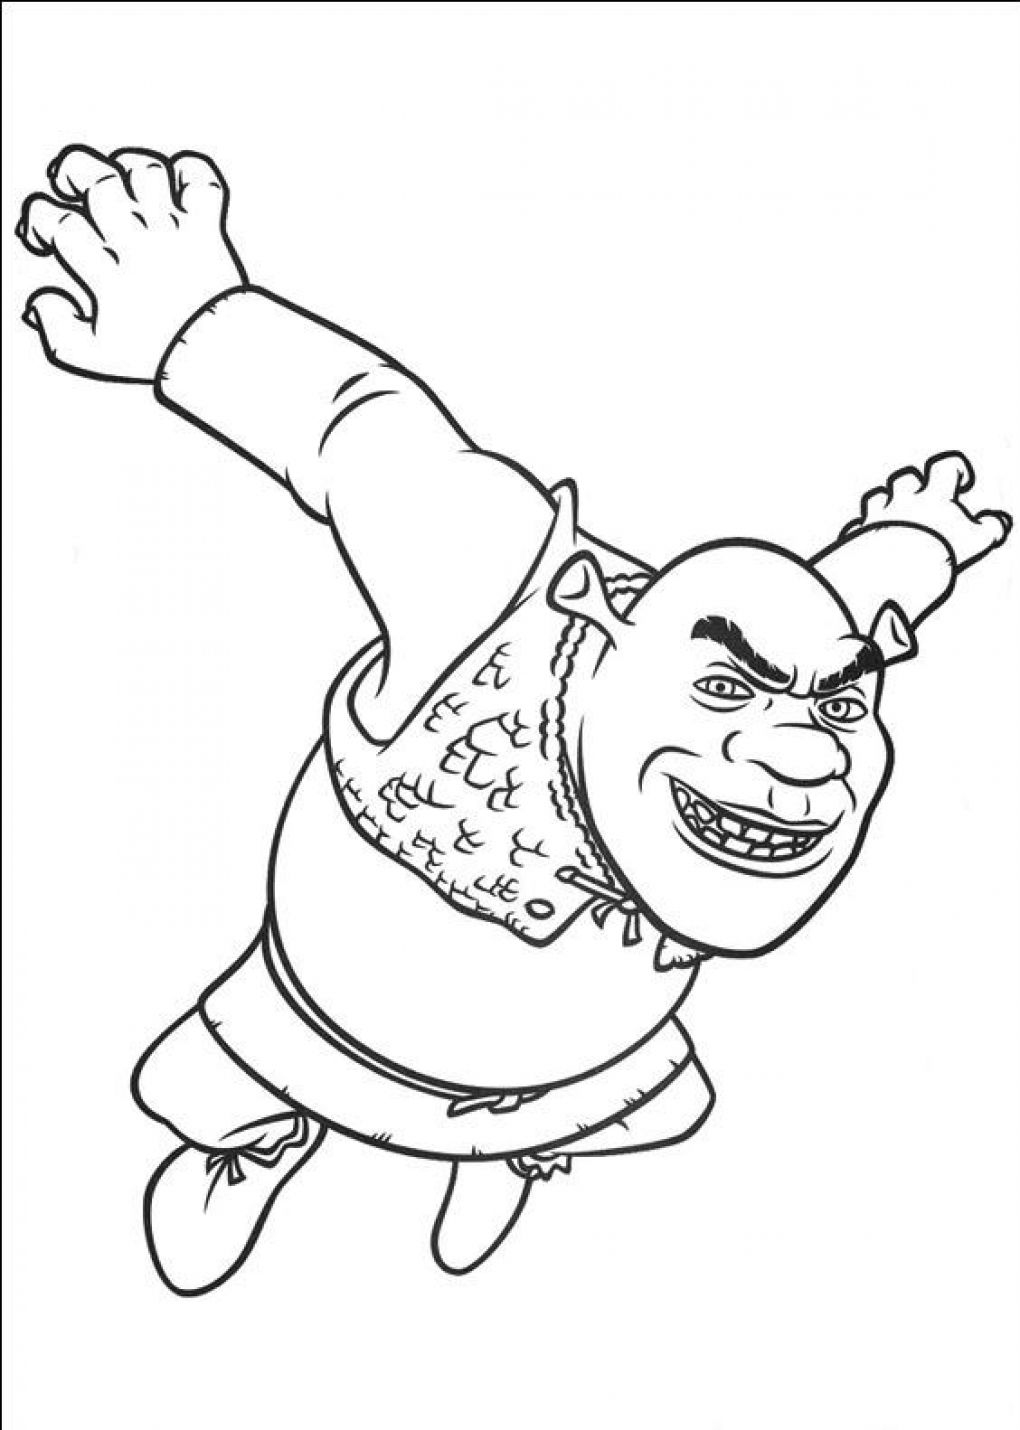 Coloring pages shrek coloring page for kids